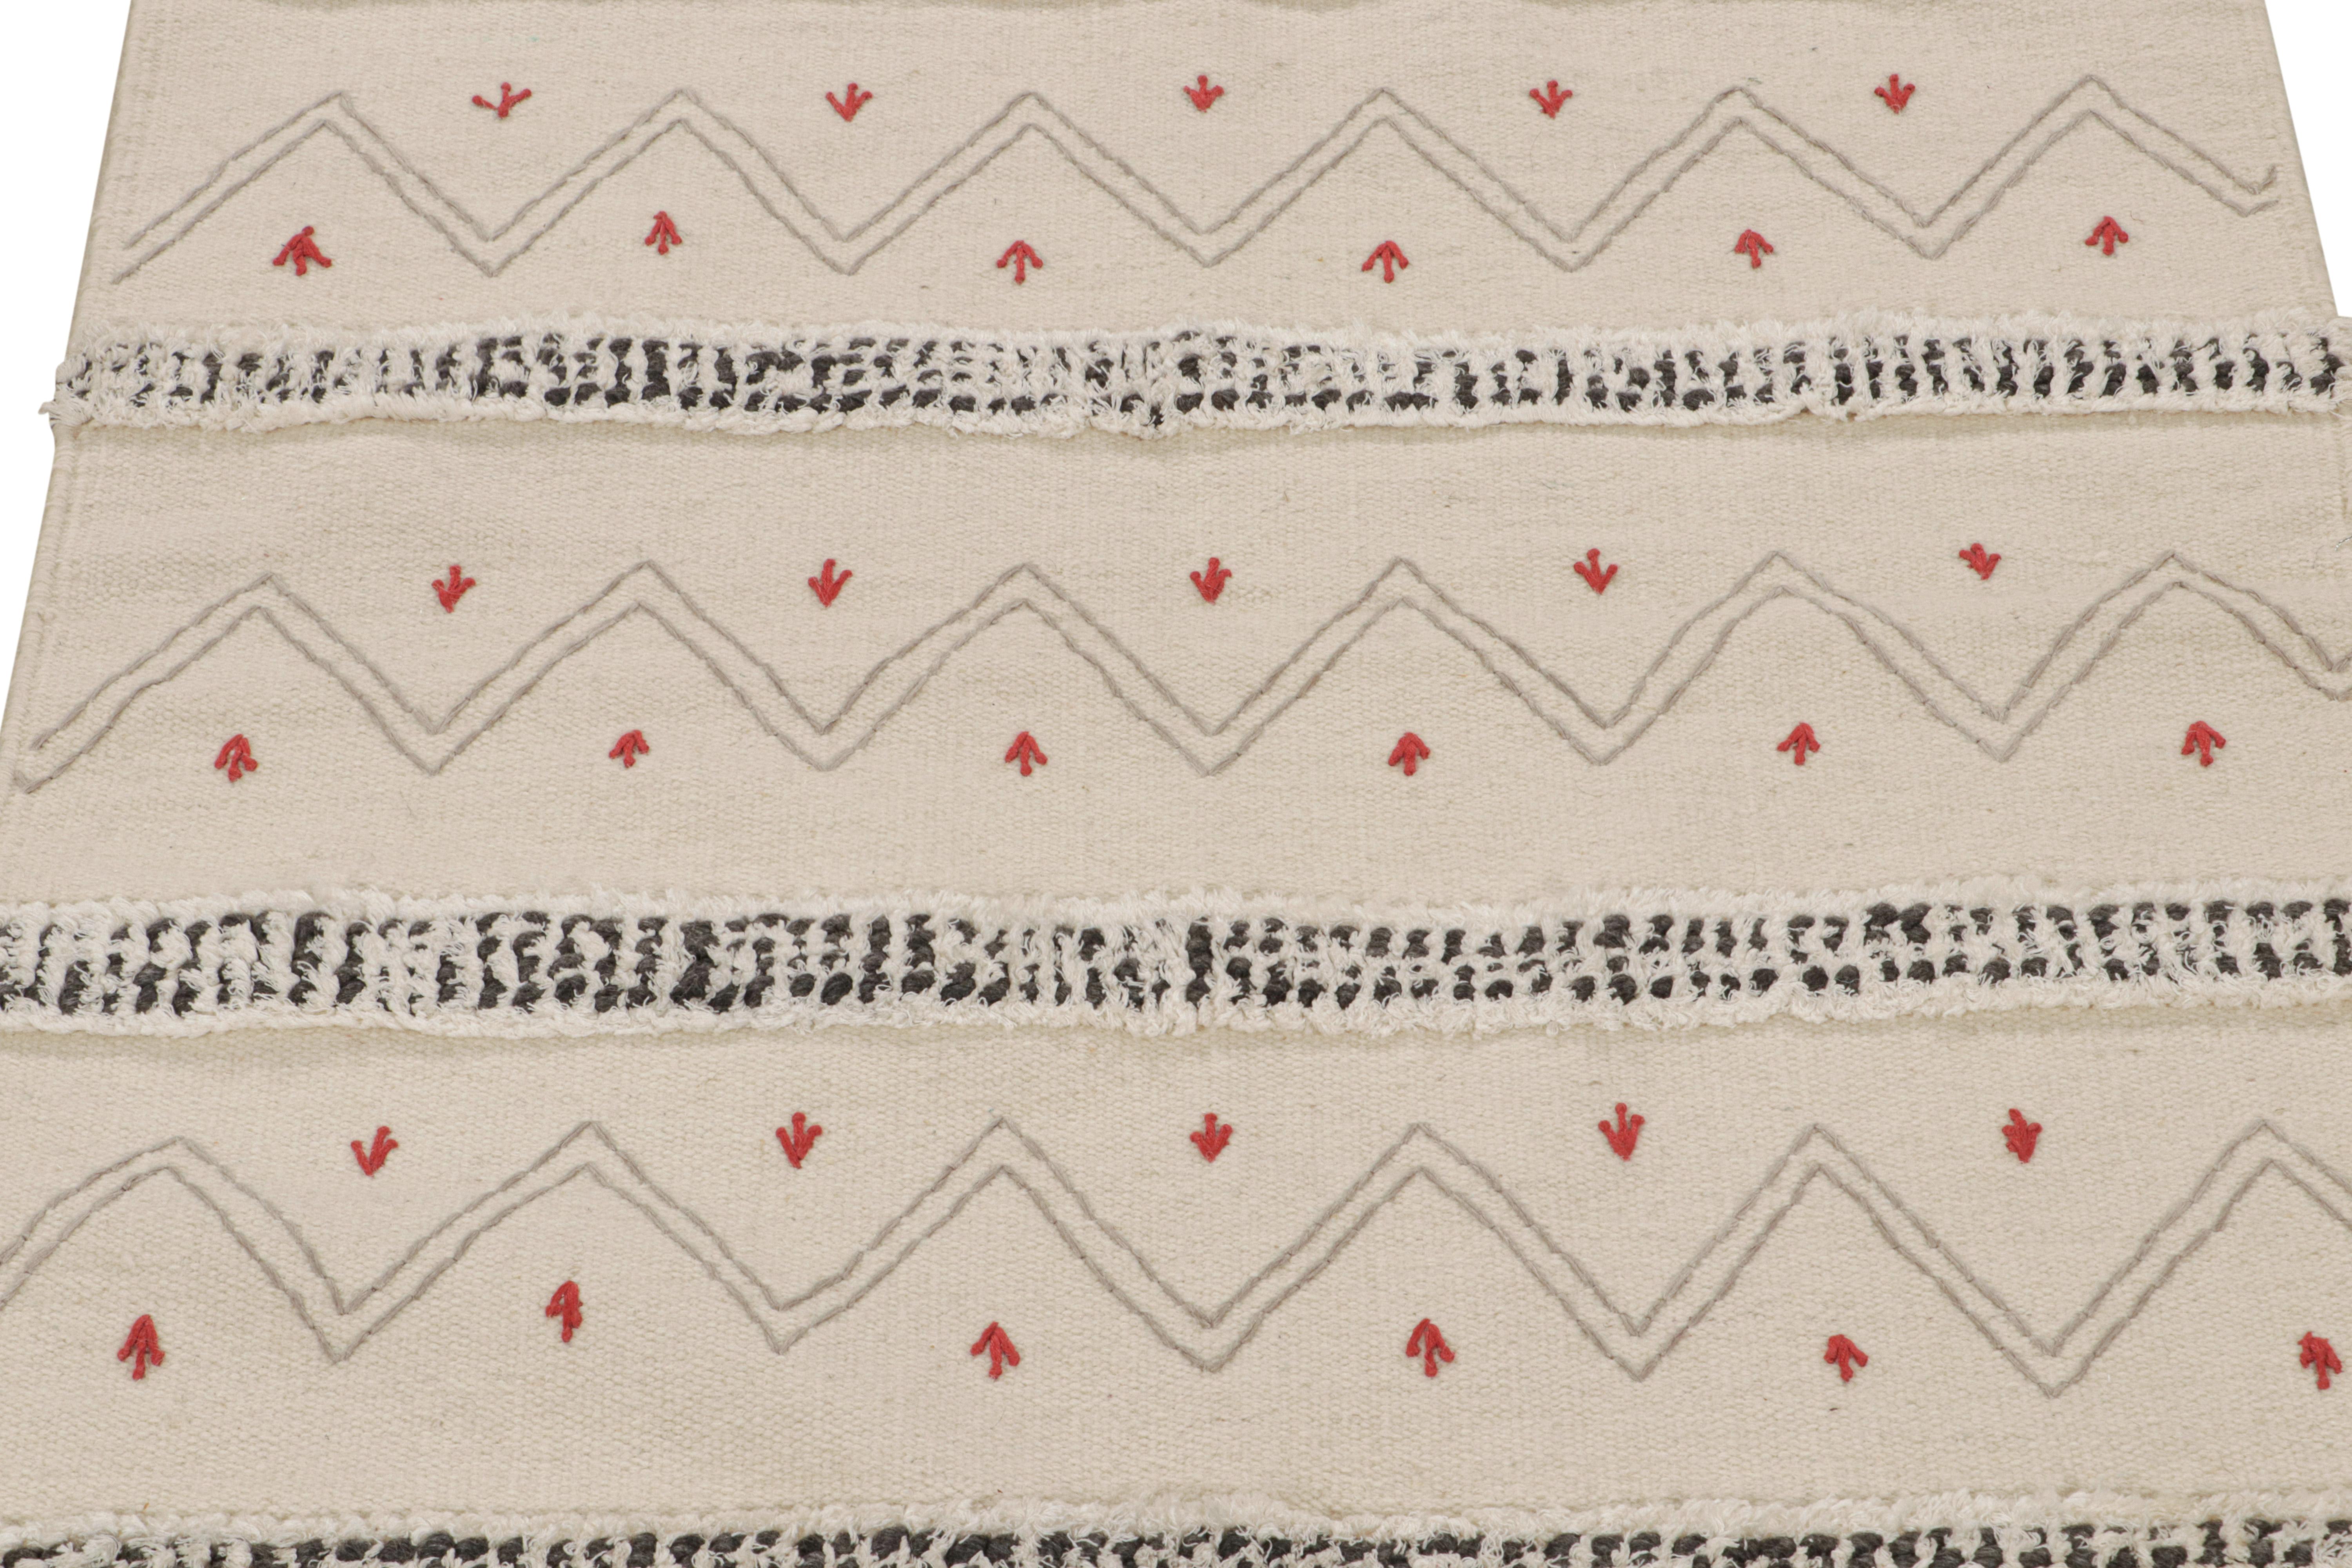 Rug & Kilim’s Tribal-Style Kilim in off White, Gray and Red Geometric Patterns In New Condition For Sale In Long Island City, NY